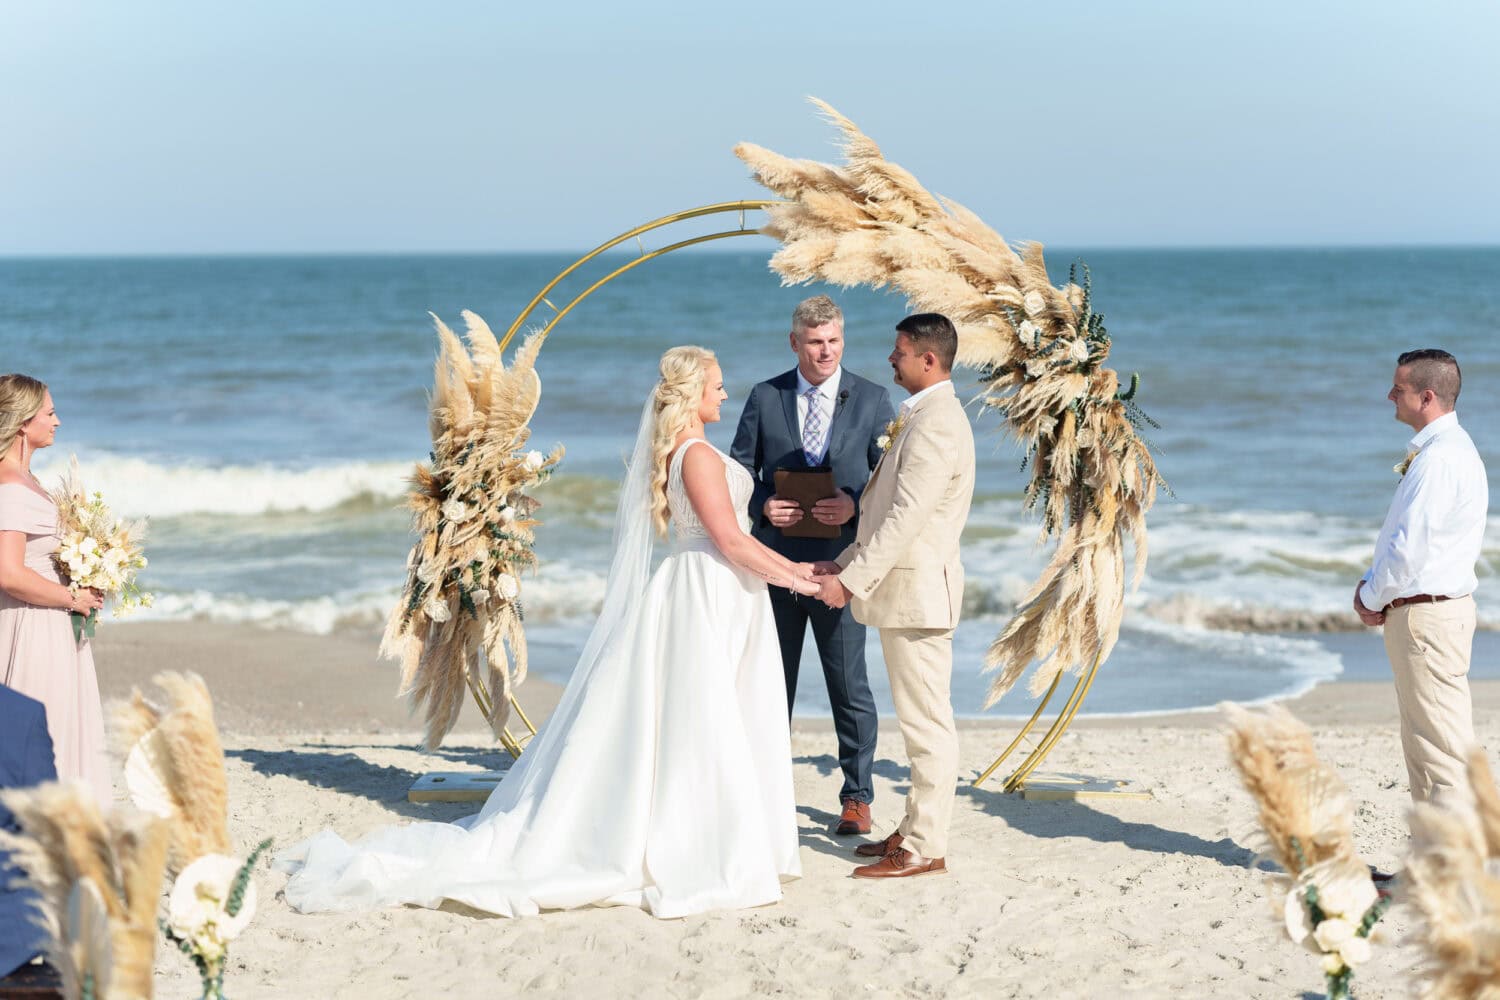 Holding hands under the wedding arch - Beach House in Pawleys Island